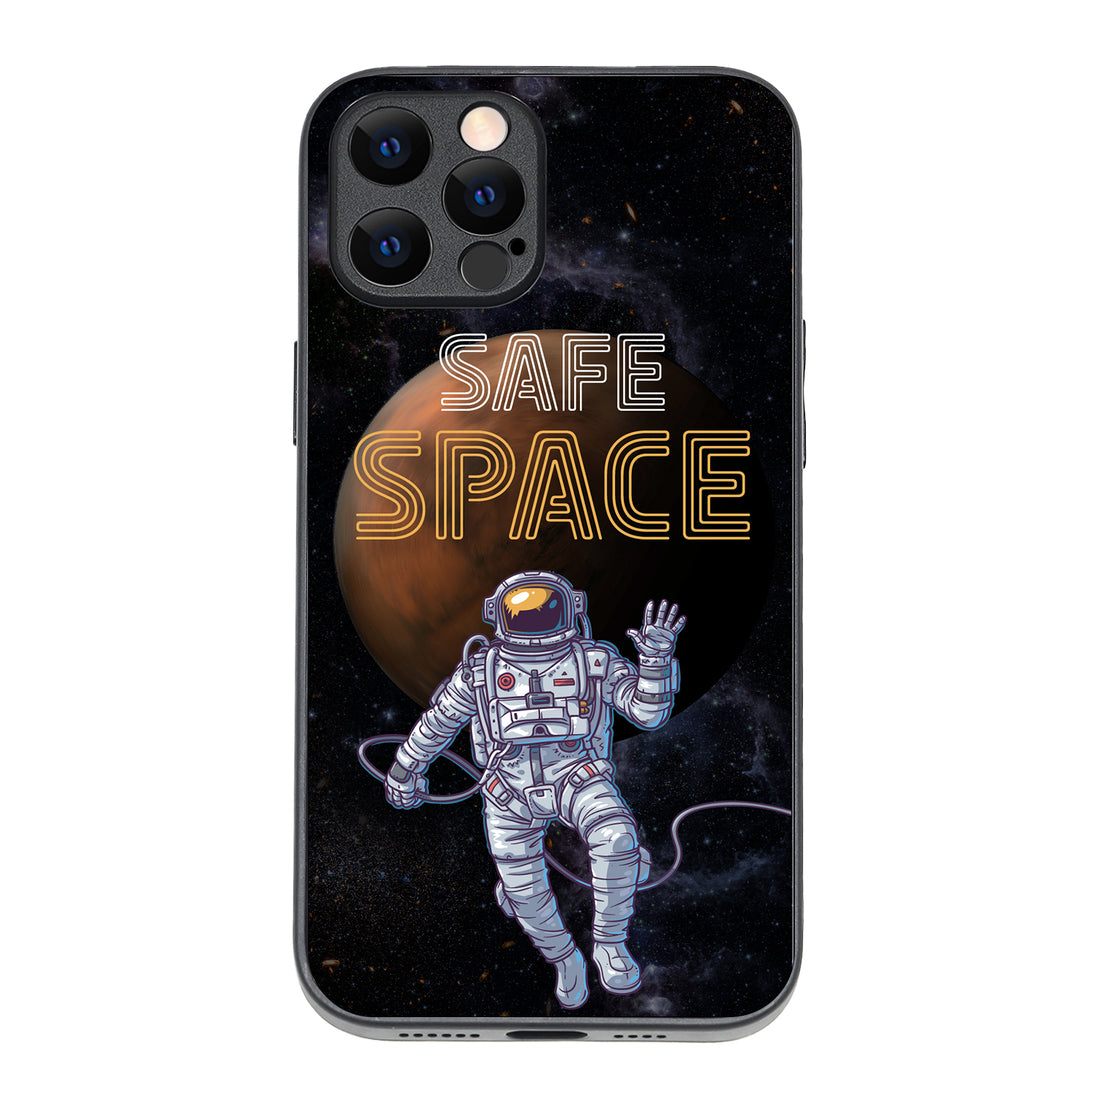 Safe Space iPhone 12 Pro Max Case